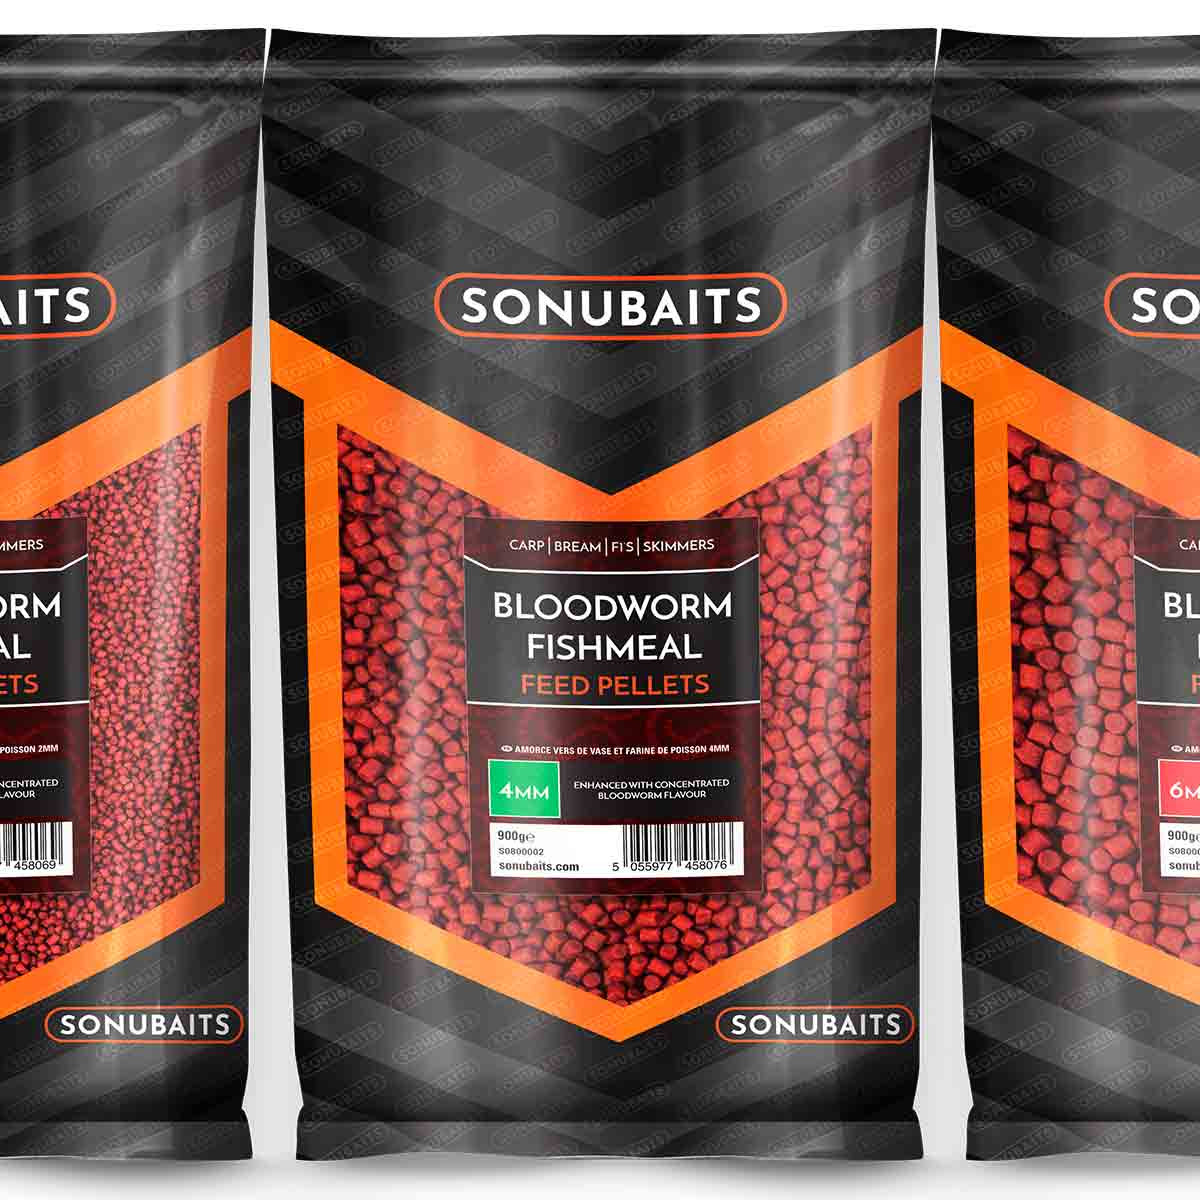 Sonu Baits Bloodworm Fishmeal Feed Pellets